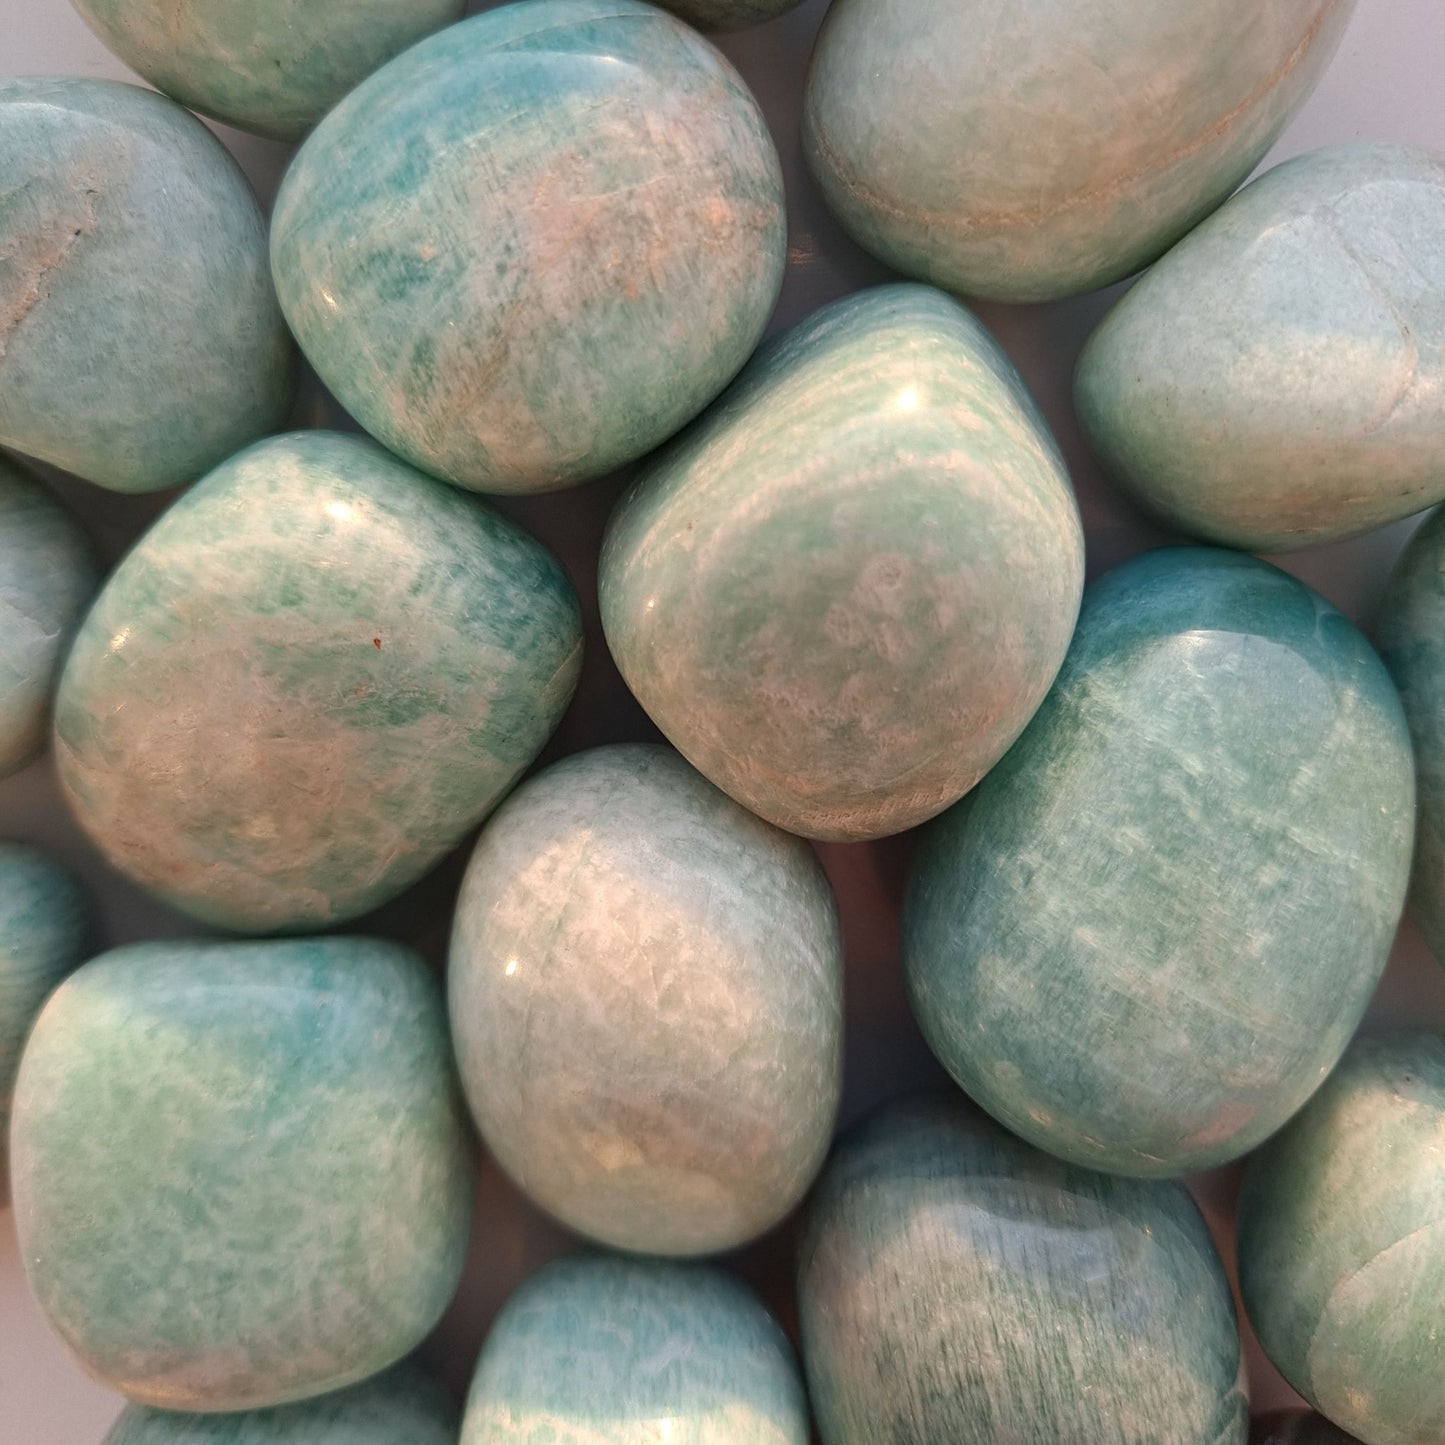 Dumi's Crystals | Amazonite Tumbled Stones (Multiple) | A collection of beautiful Amazonite Tumbled Stones, varying in size and shape. Amazonite is known for its tranquil blue-green hues and its ability to promote peace, balance, and inner truth.